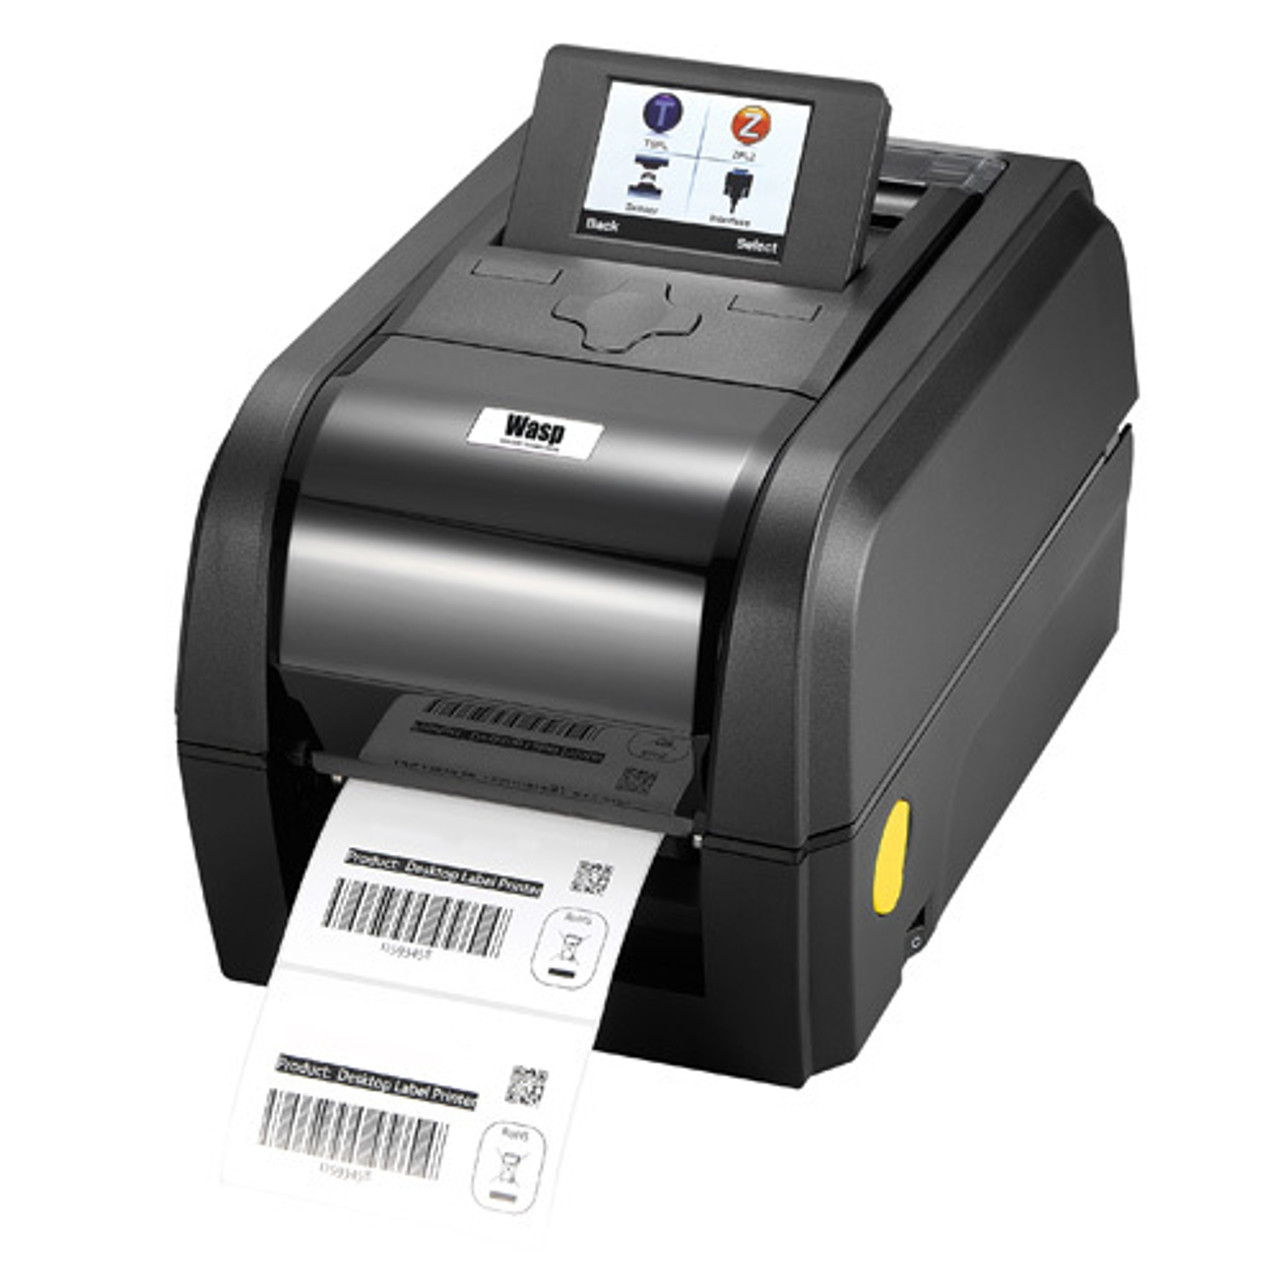 ZEBRA ZD421 Direct Thermal Desktop Printer 203 dpi Print Width 4-inch Features Wired USB and 802.11ac Connectivity ZD4A042-D01W01EZ, No Thermal Ribbon - 1